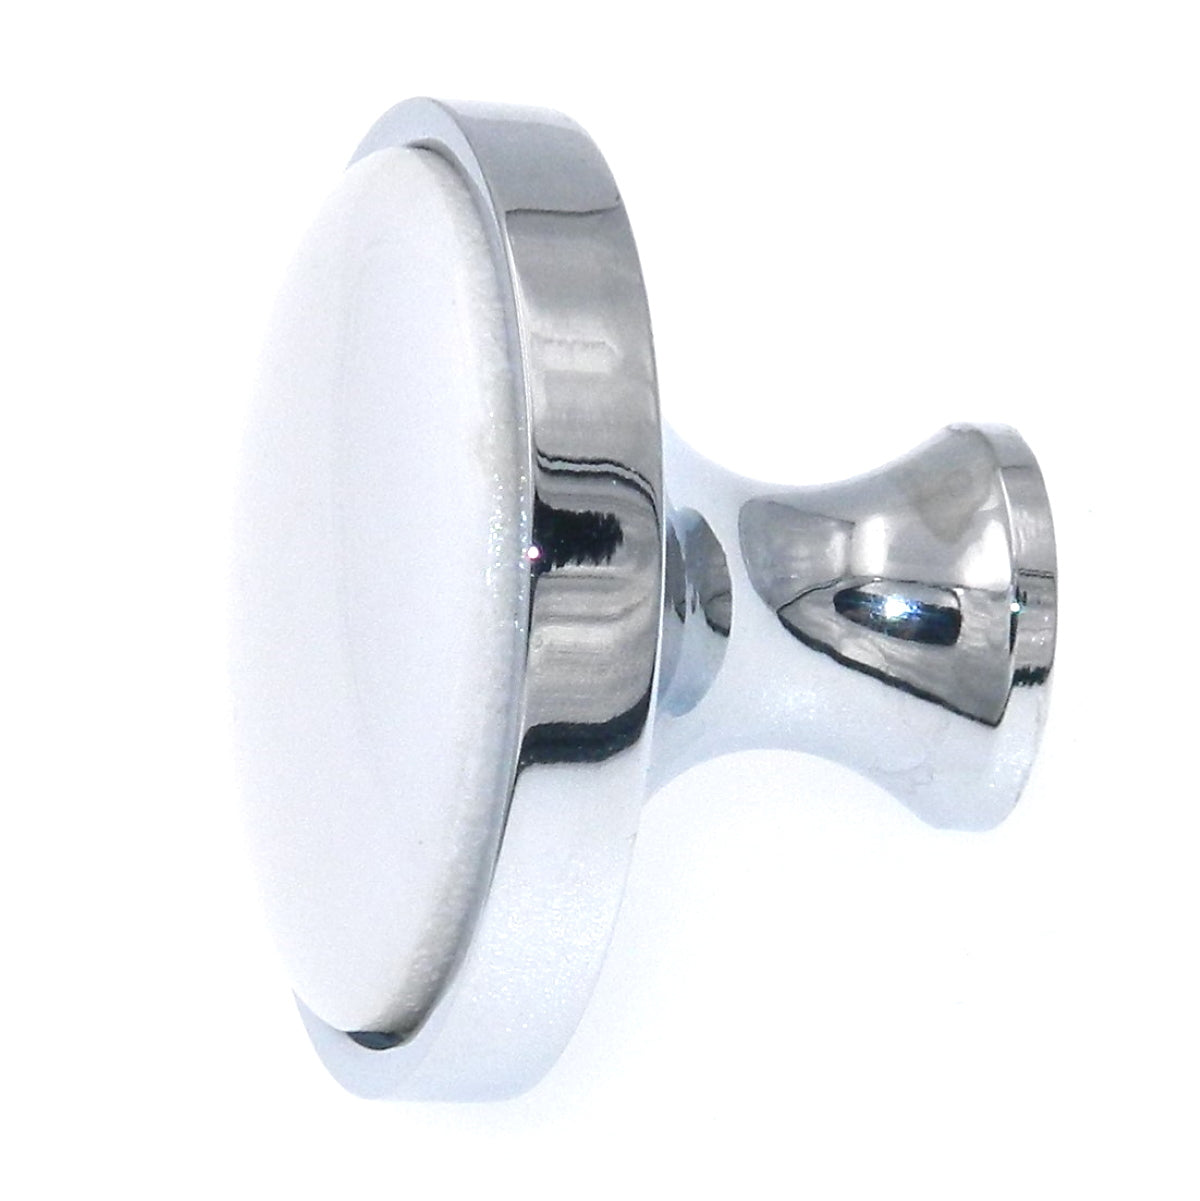 Hickory Hardware Milan Chrome Finished Solid Brass and White Porcelain 1 1/4" Cabinet Knob P9821-W